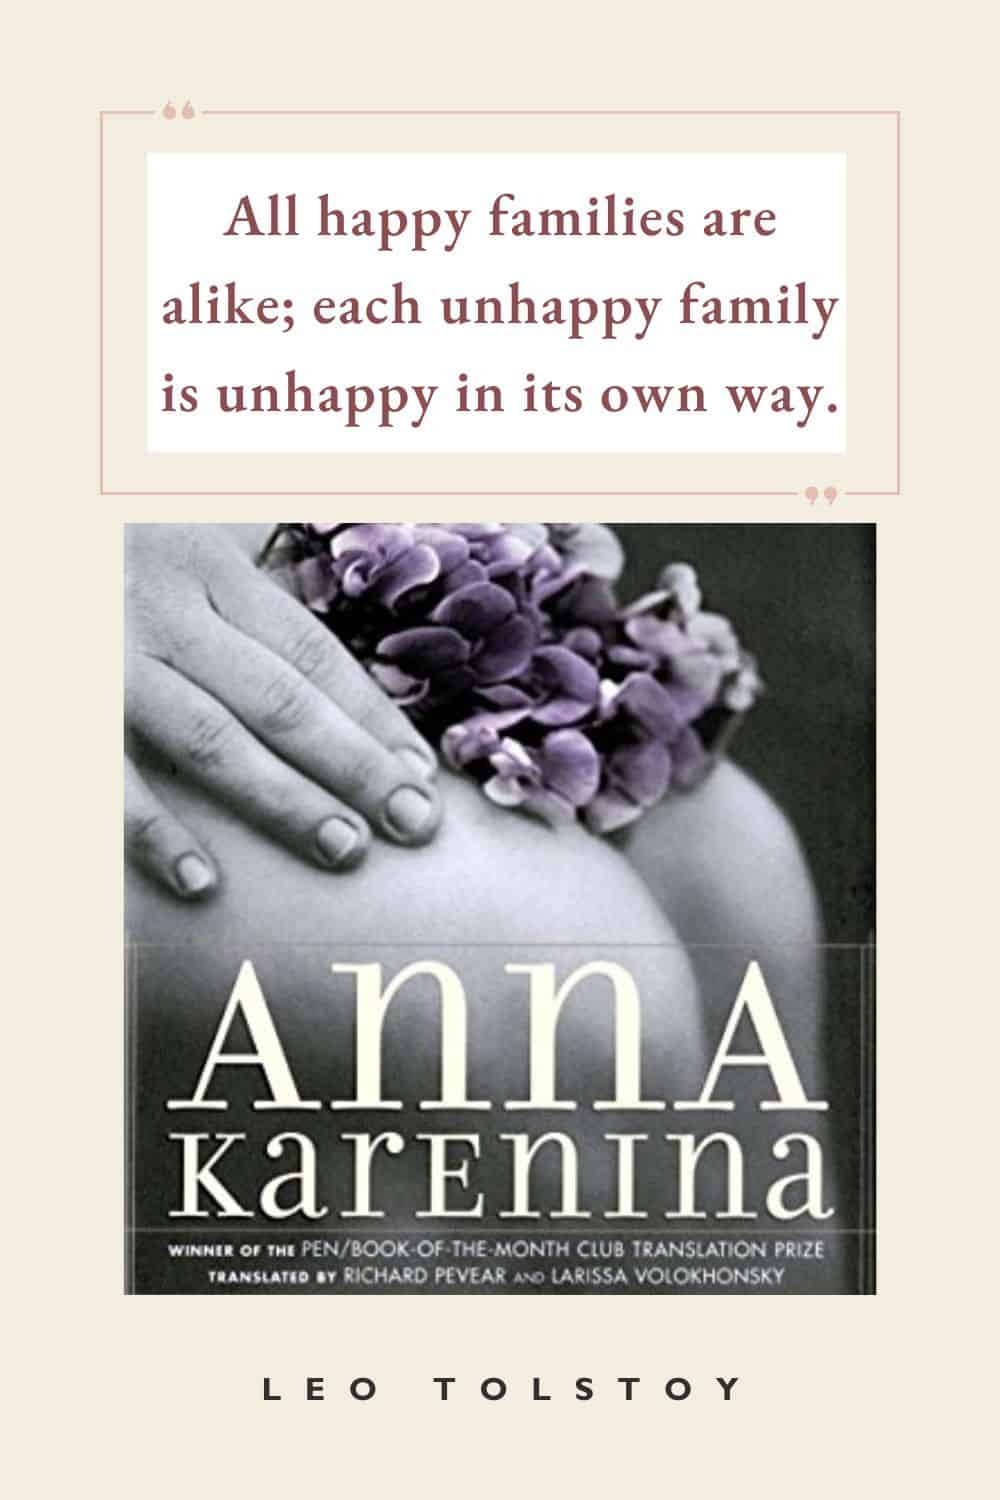 the opening line of anna karenina by leo tolstoy: "All happy families are alike; each unhappy family is unhappy in its own way."